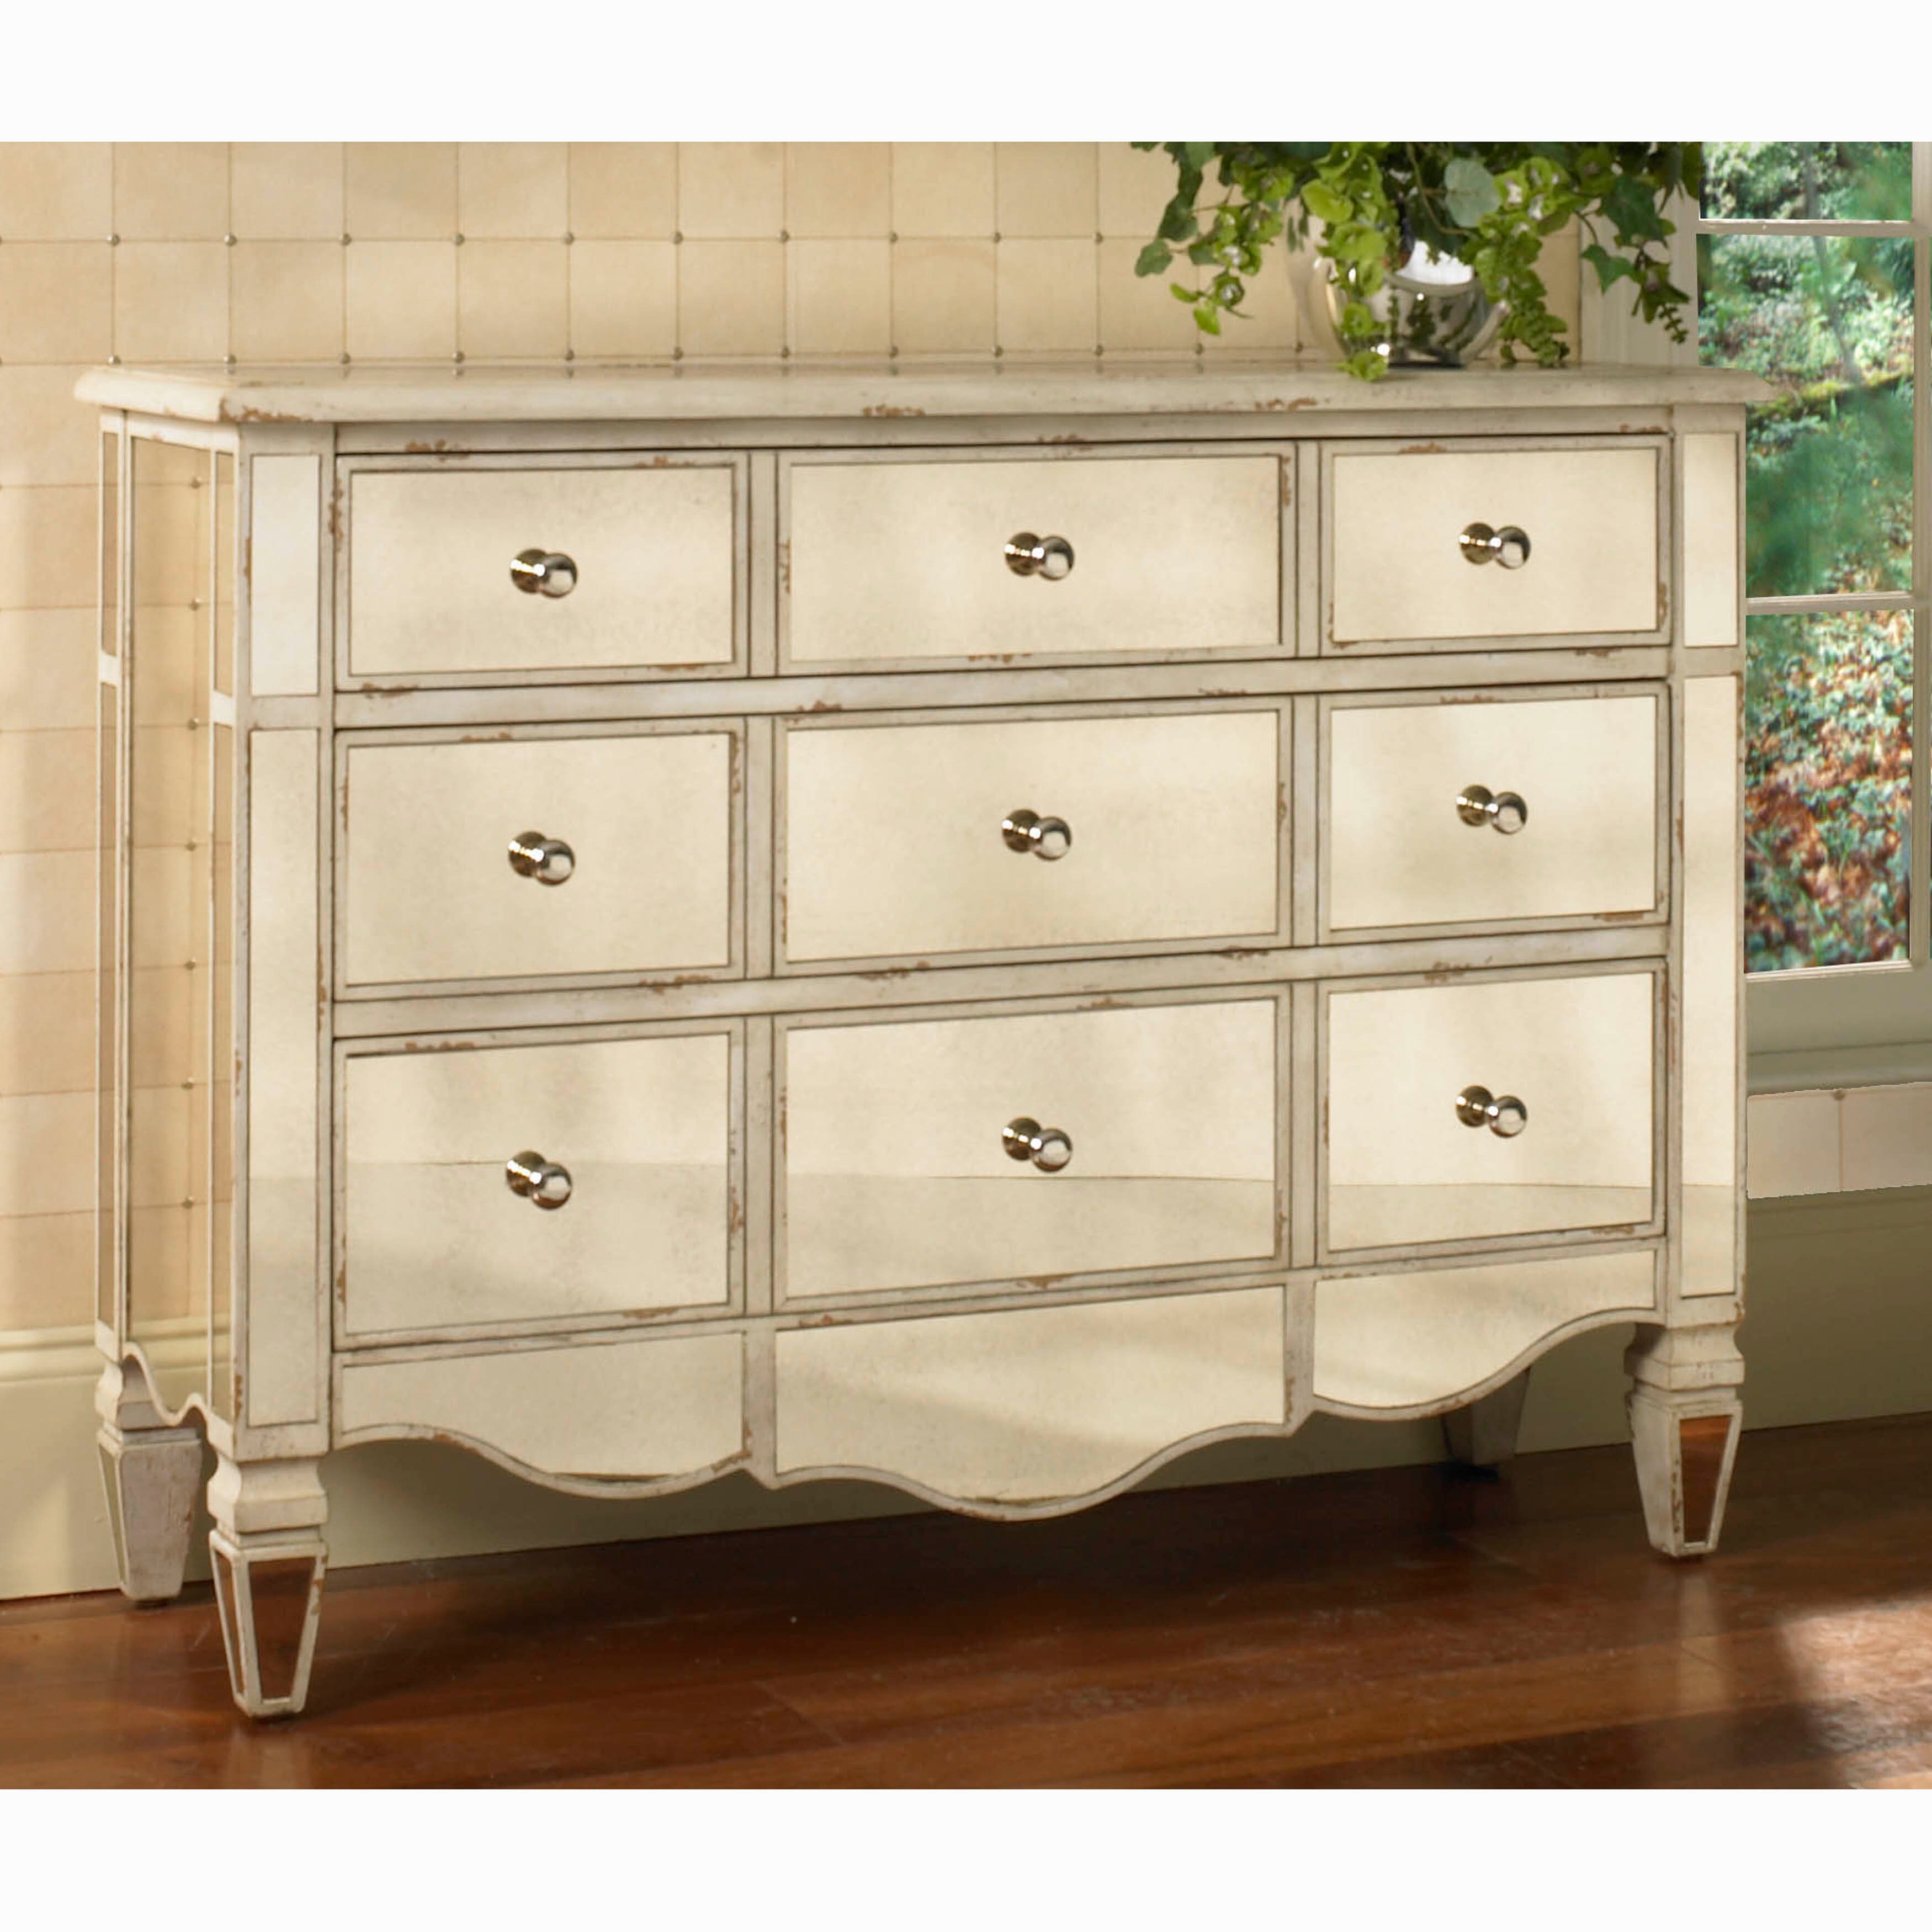 Hand-painted Mirrored Drawer Accent Chest